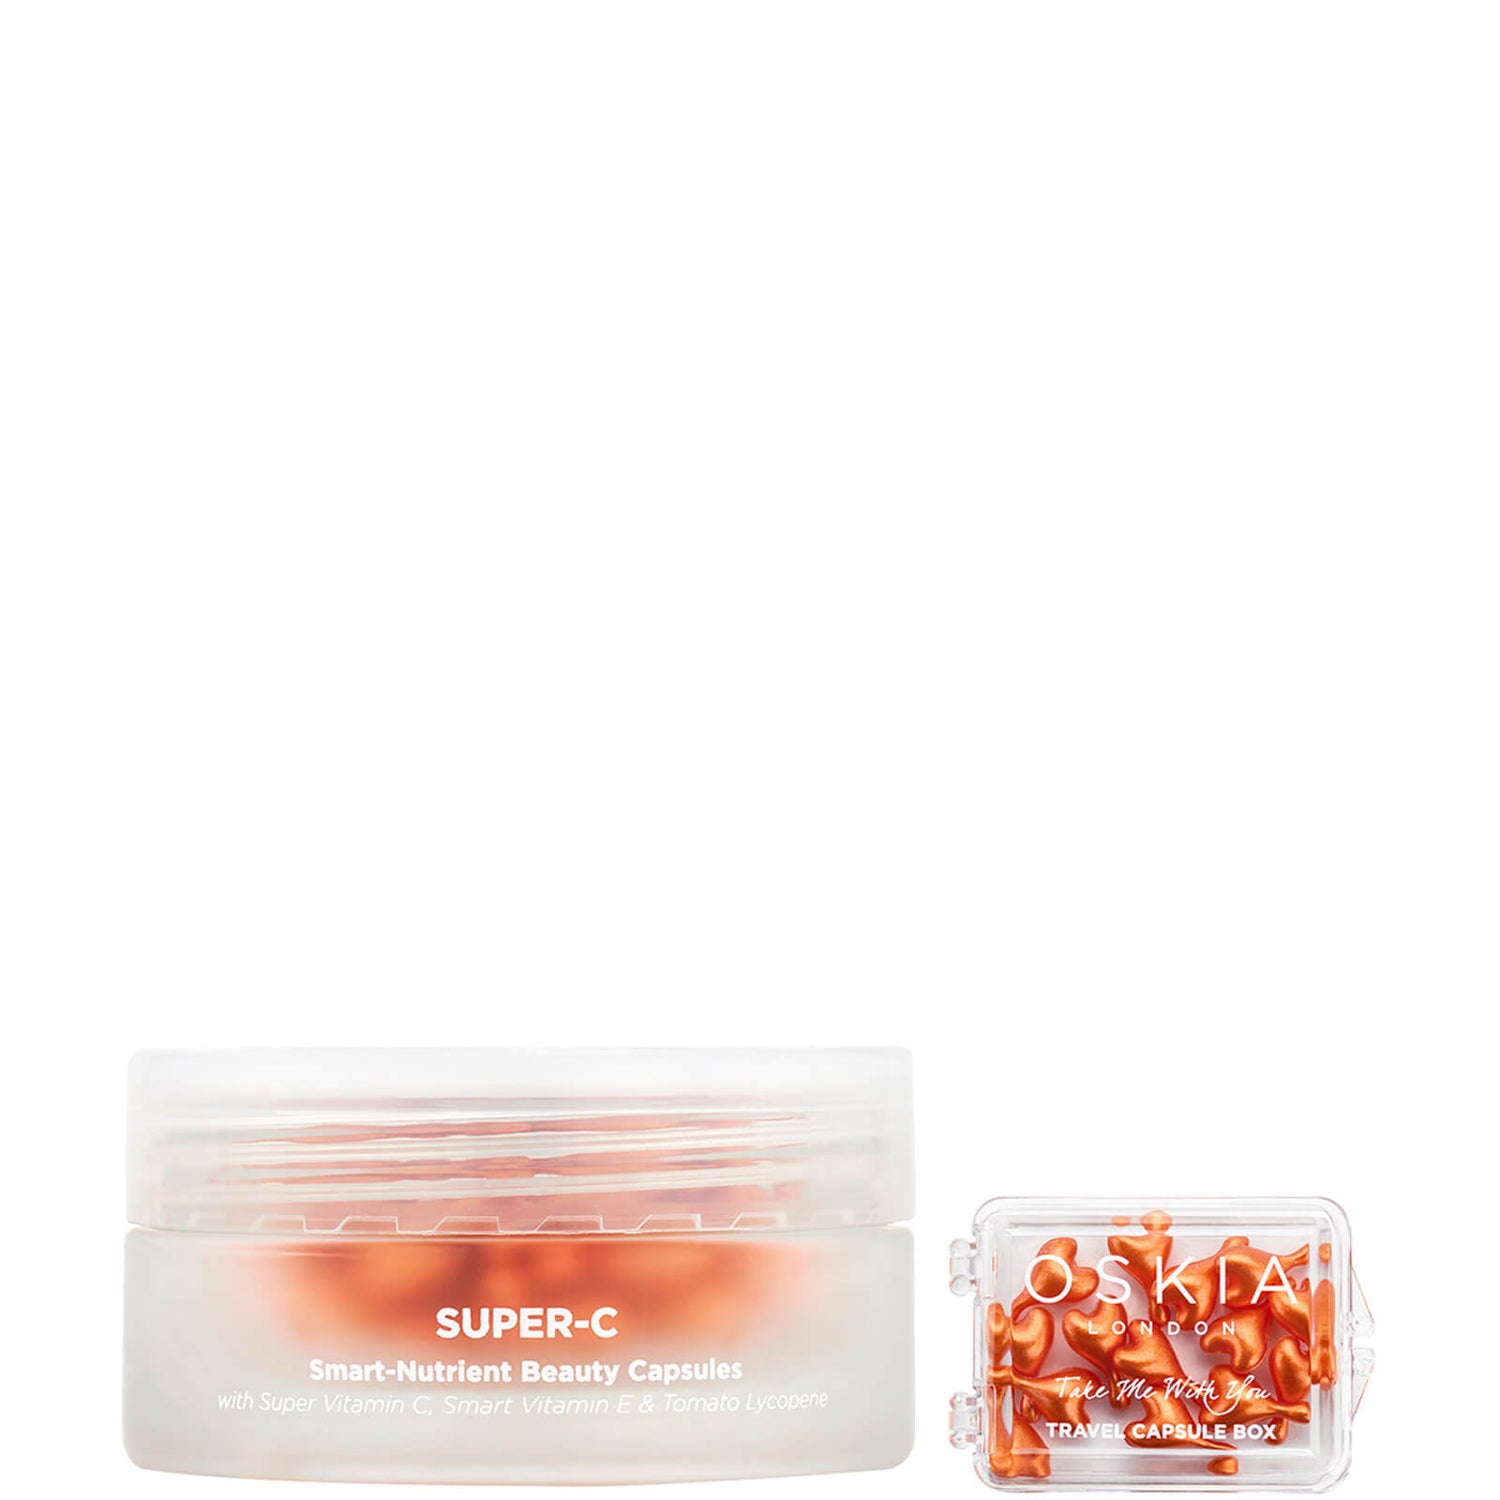 Oskia Home and Away Super-C Smart Nutrient Beauty Capsules